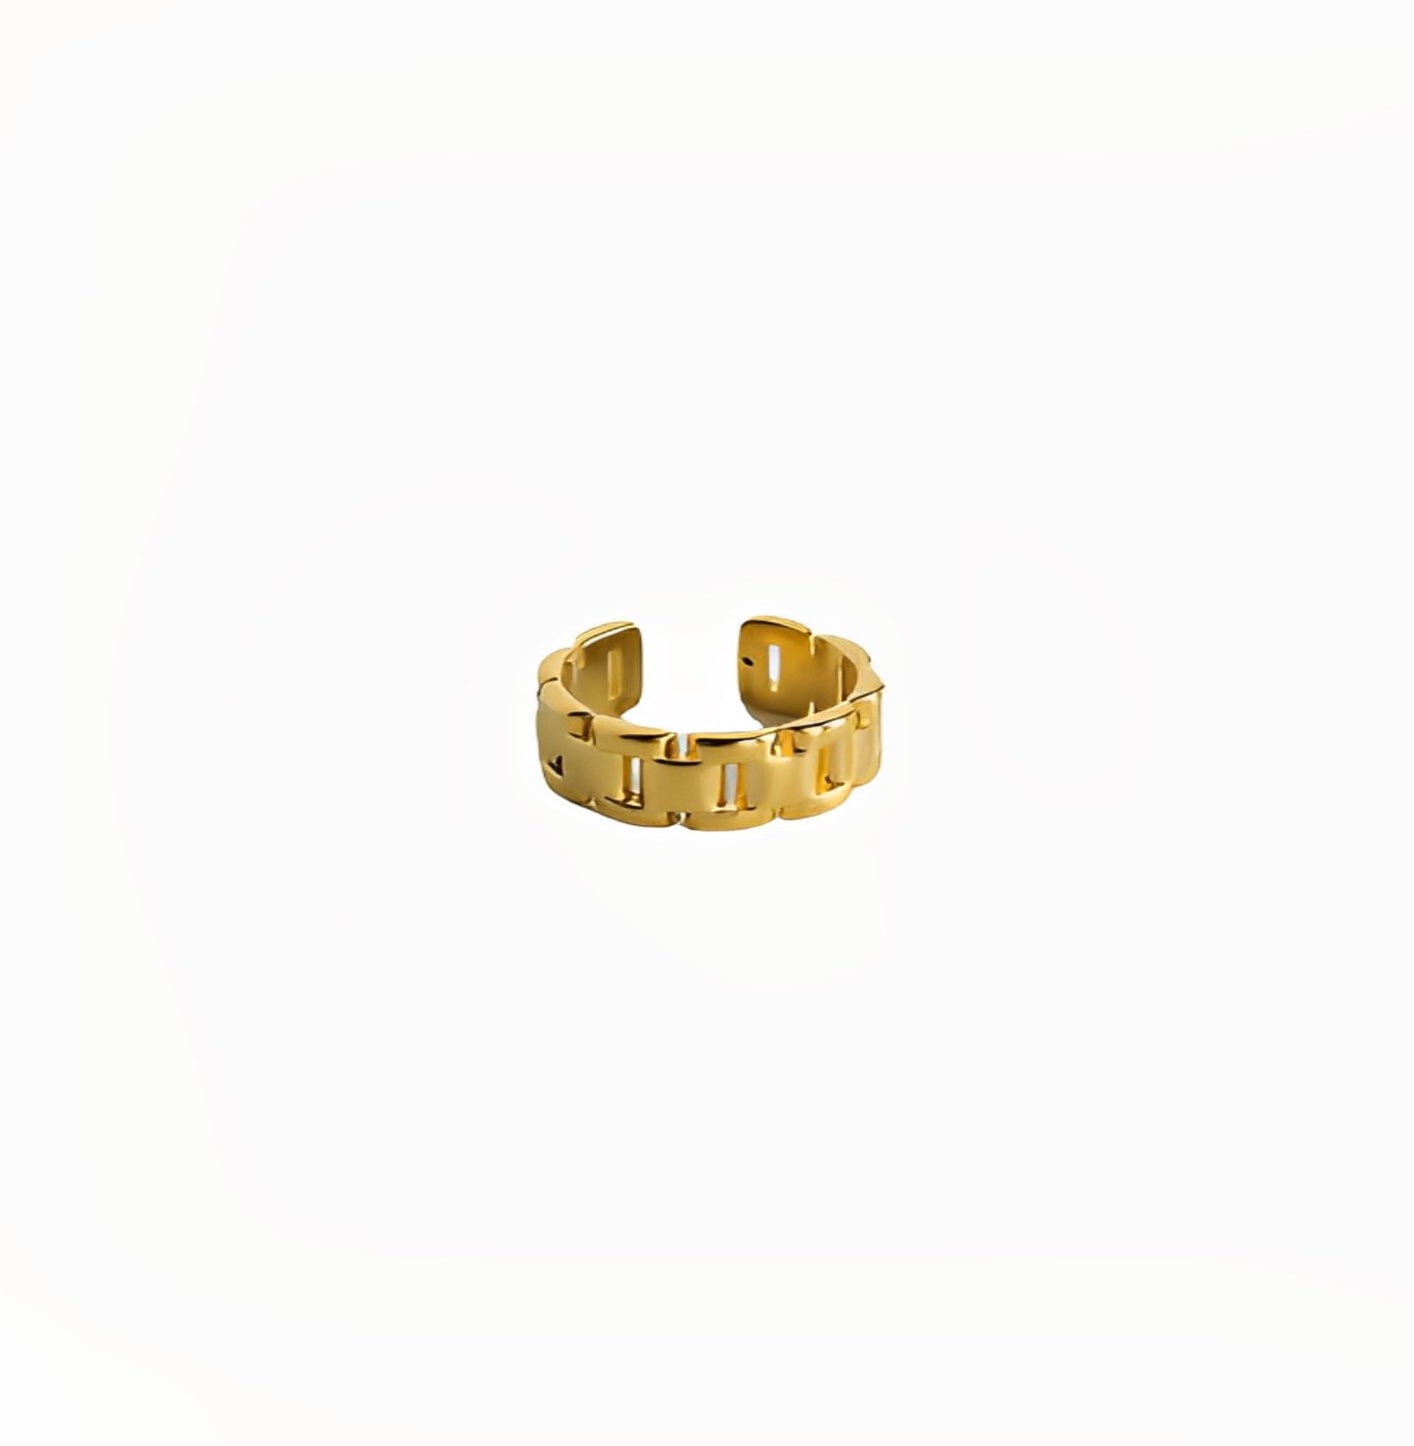 BAND RING ring Yubama Jewelry Online Store - The Elegant Designs of Gold and Silver ! 